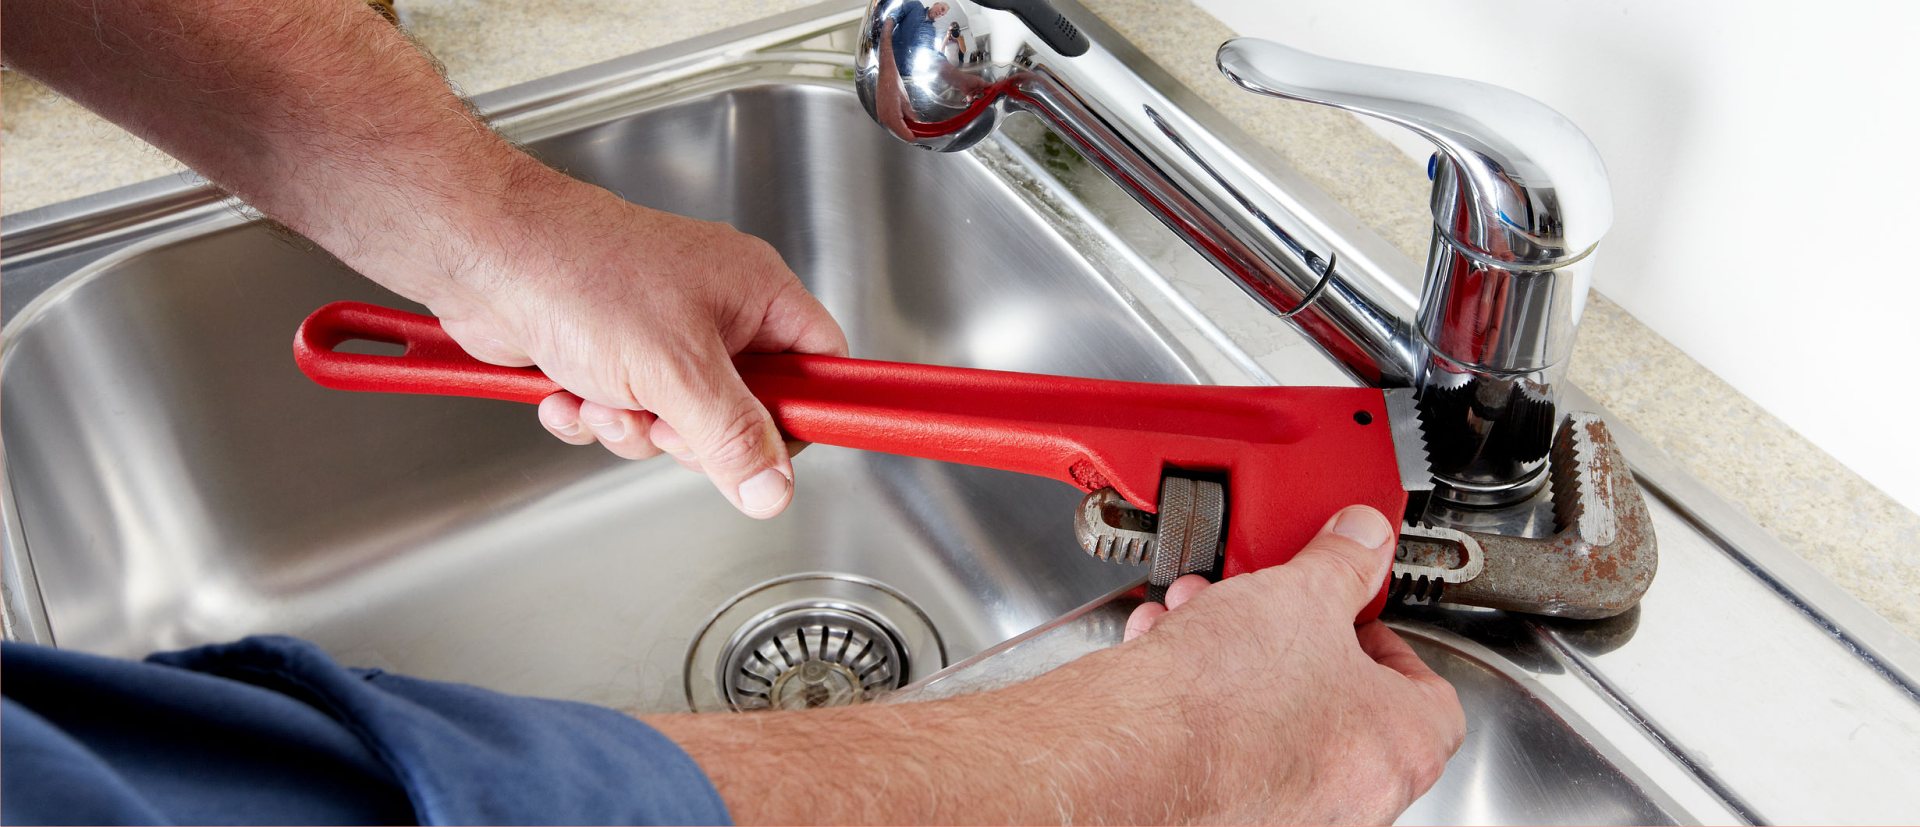 Special Offers for Plumbing Services by ABV Plumbing